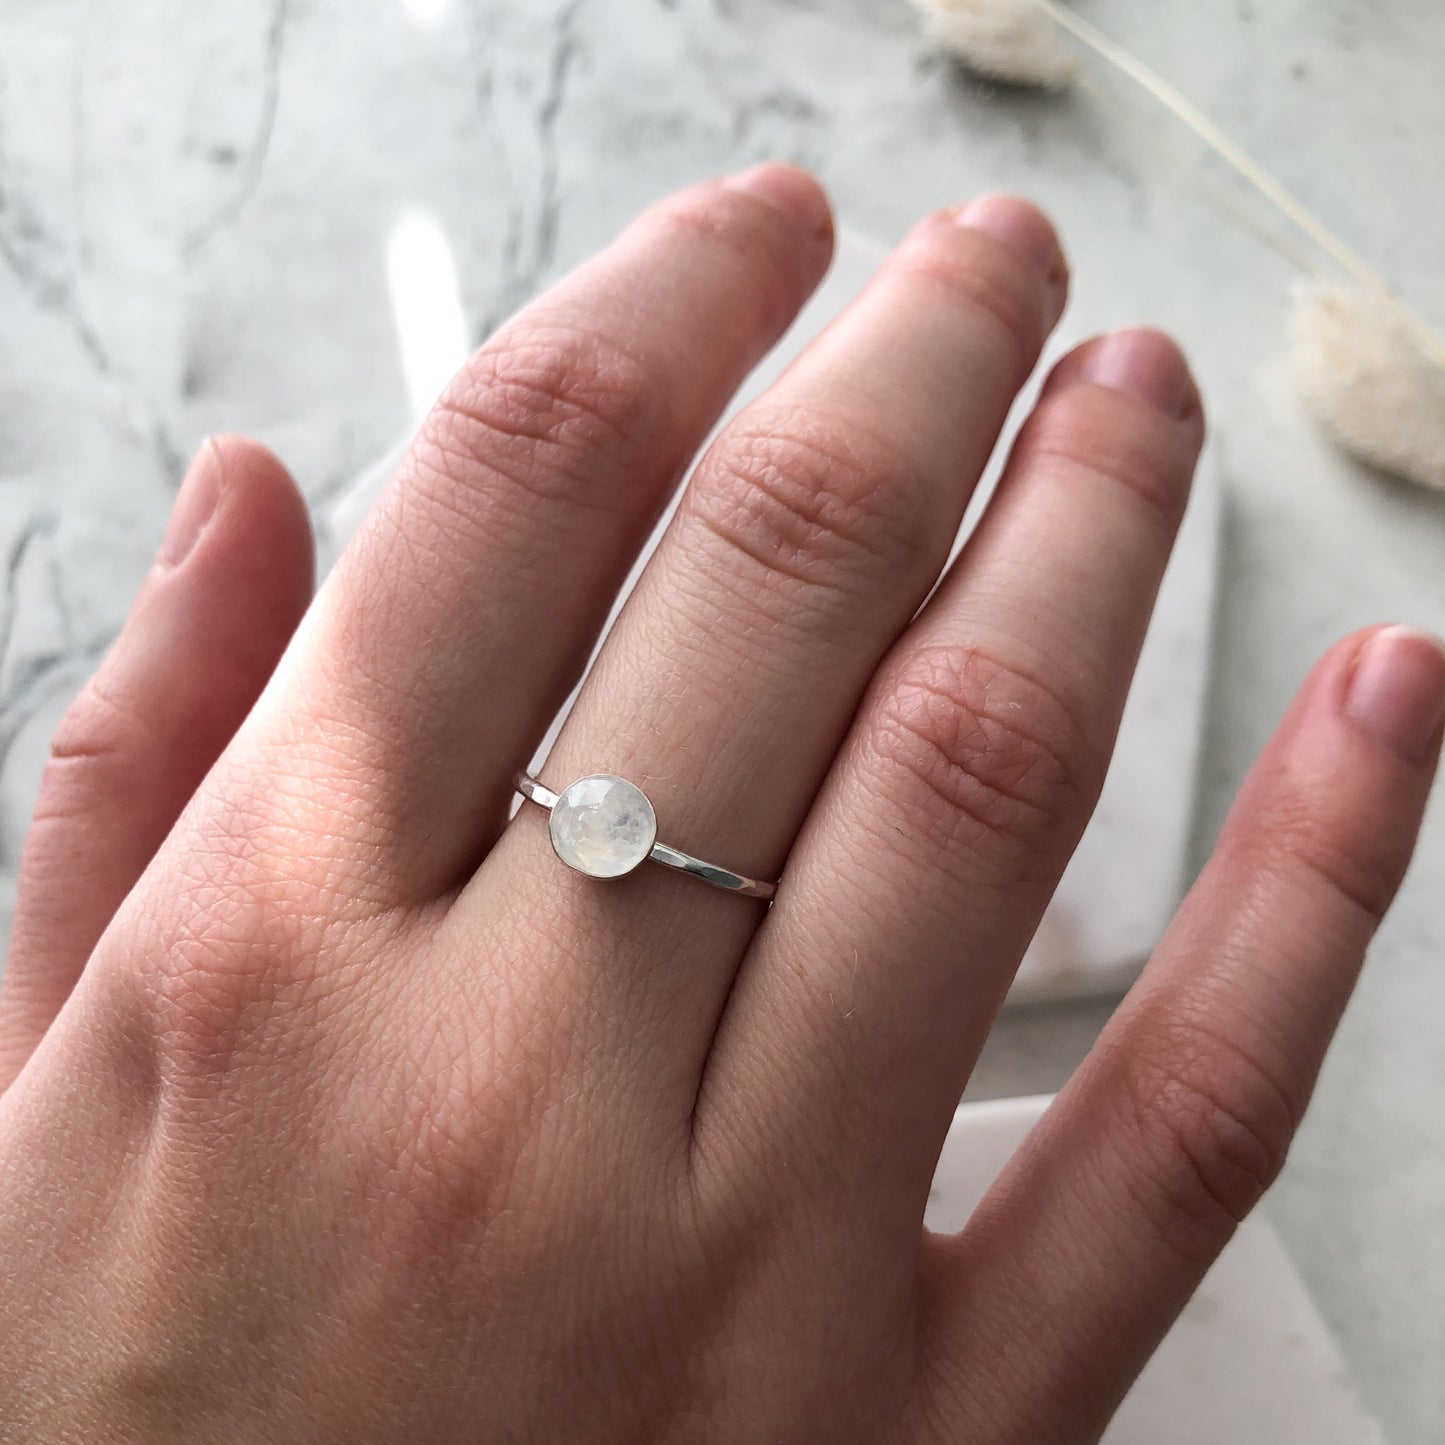 Rainbow Moonstone Stacking Ring - Sterling Silver